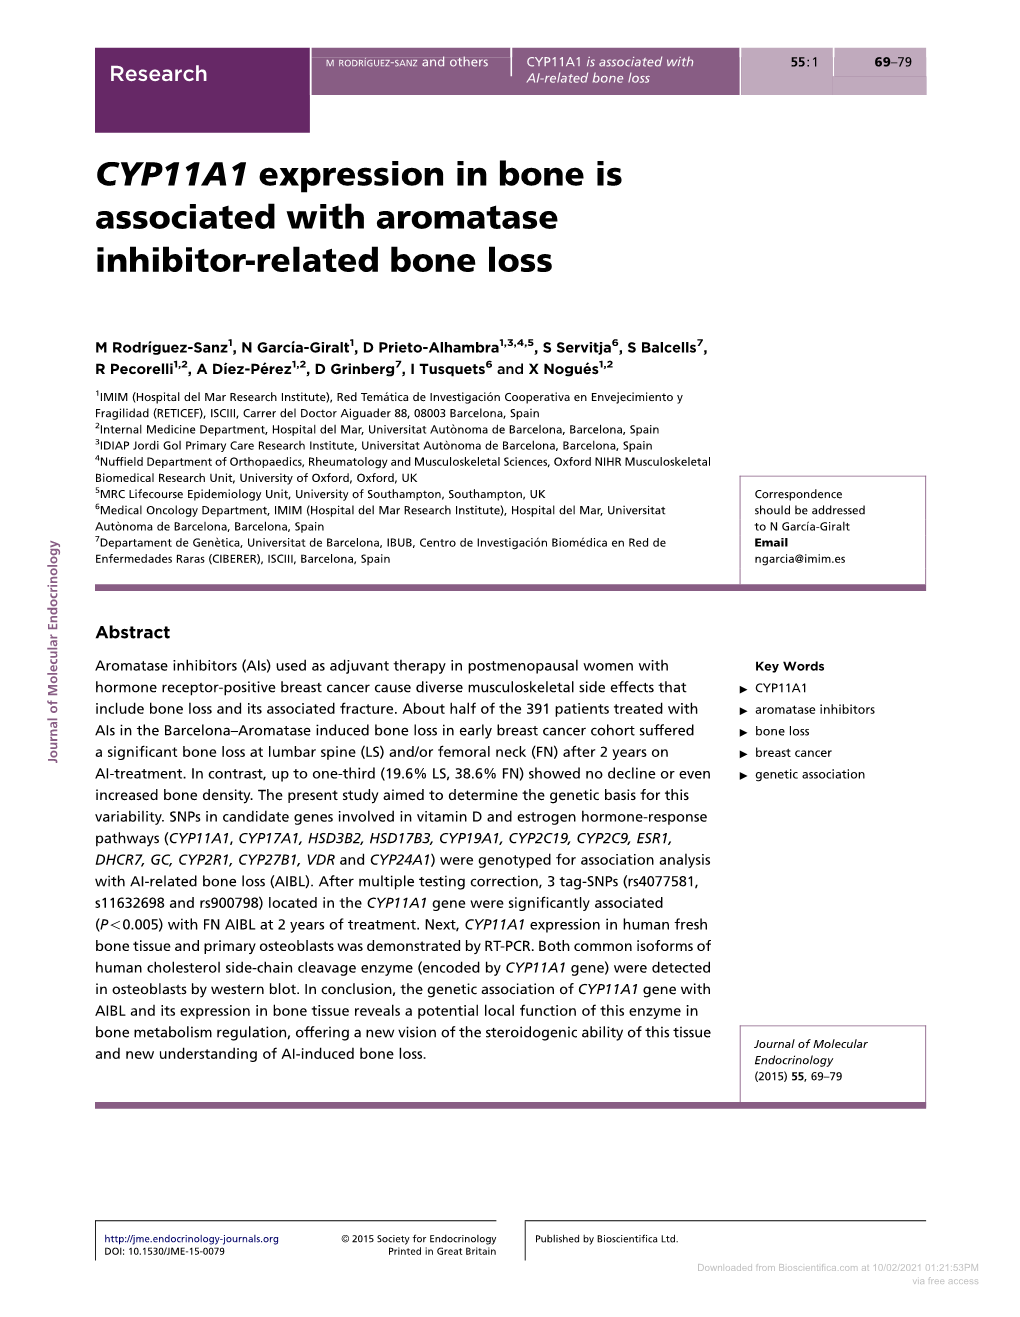 CYP11A1 Expression in Bone Is Associated with Aromatase Inhibitor-Related Bone Loss